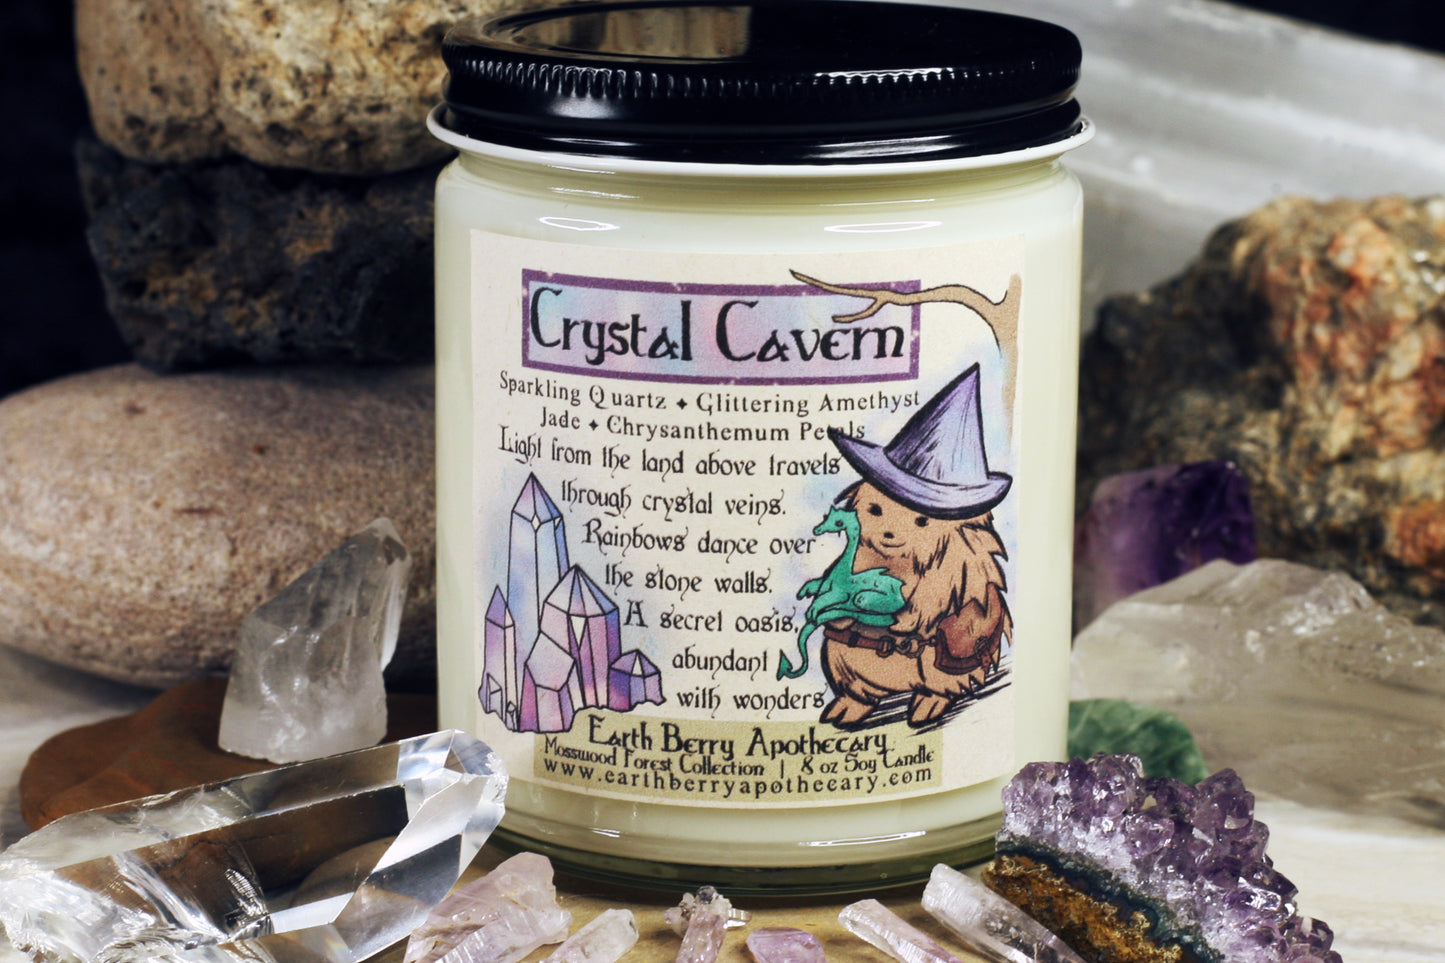 Crystal cavern soy candle with quartz amethyst cactus flower and Jade scents. The hedge witch wears a side pack and holds a green dragon.